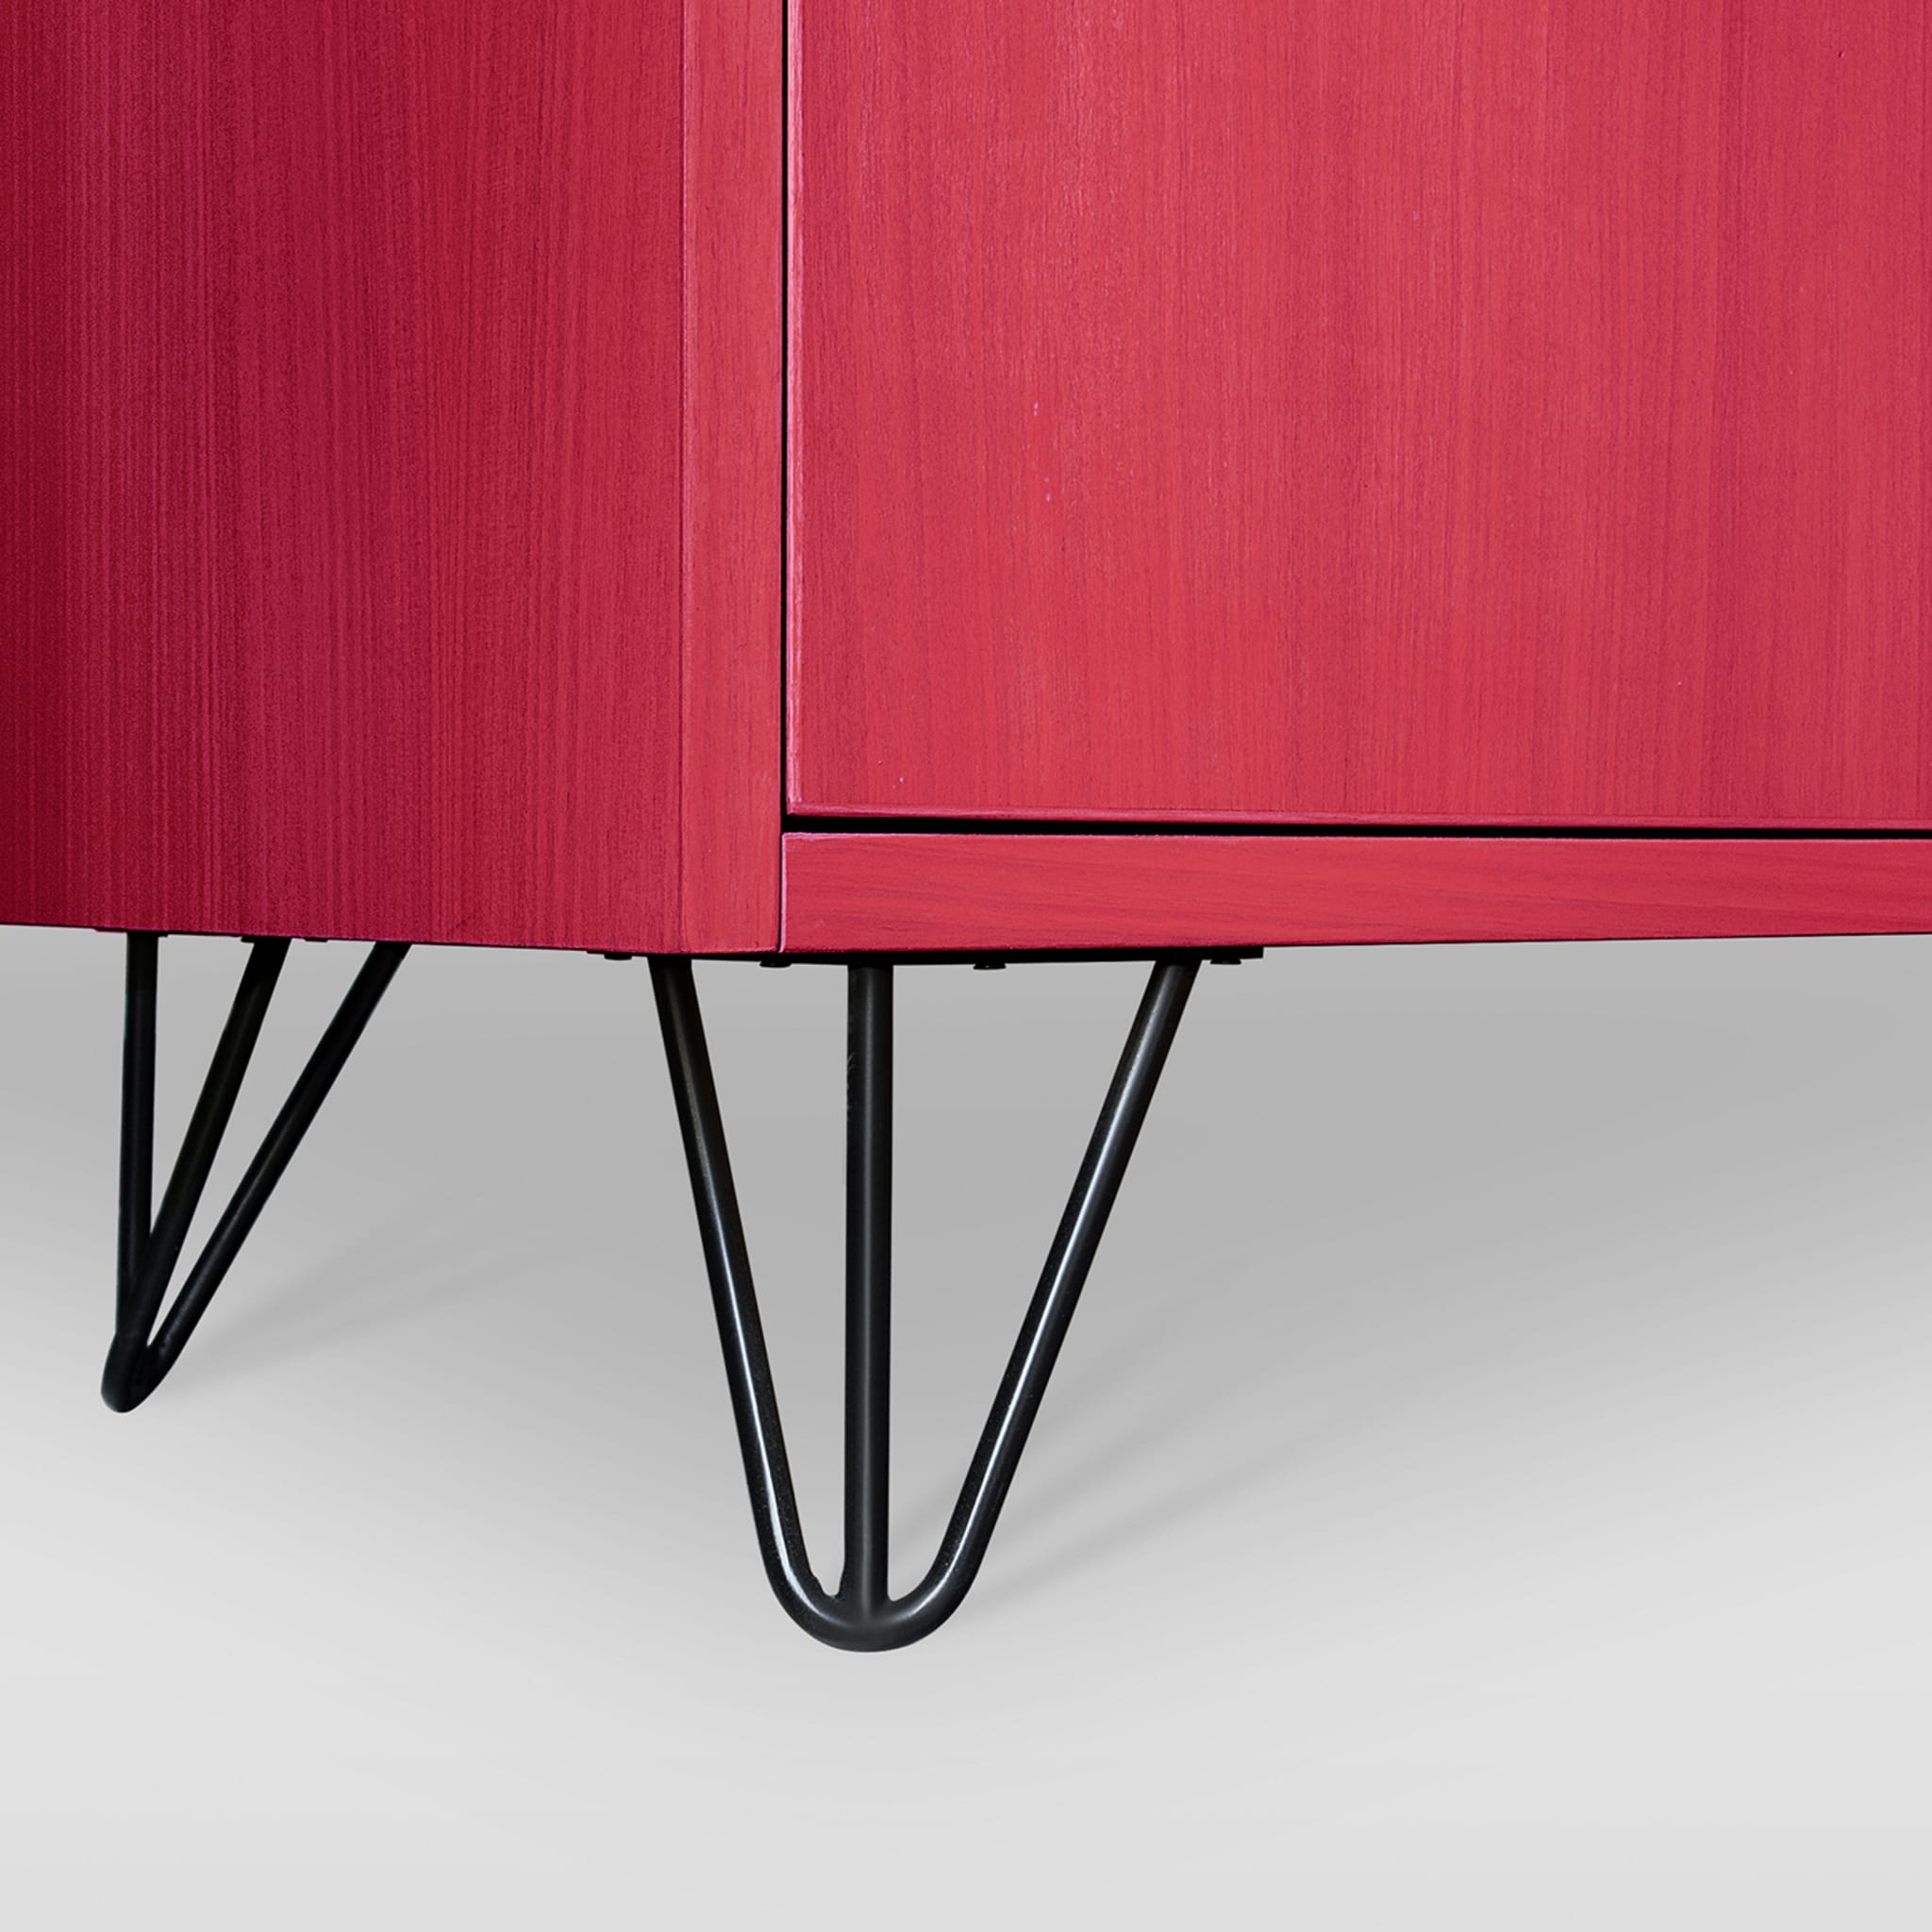 Eroica Red Cabinet by Eugenio Gambella - Alternative view 2